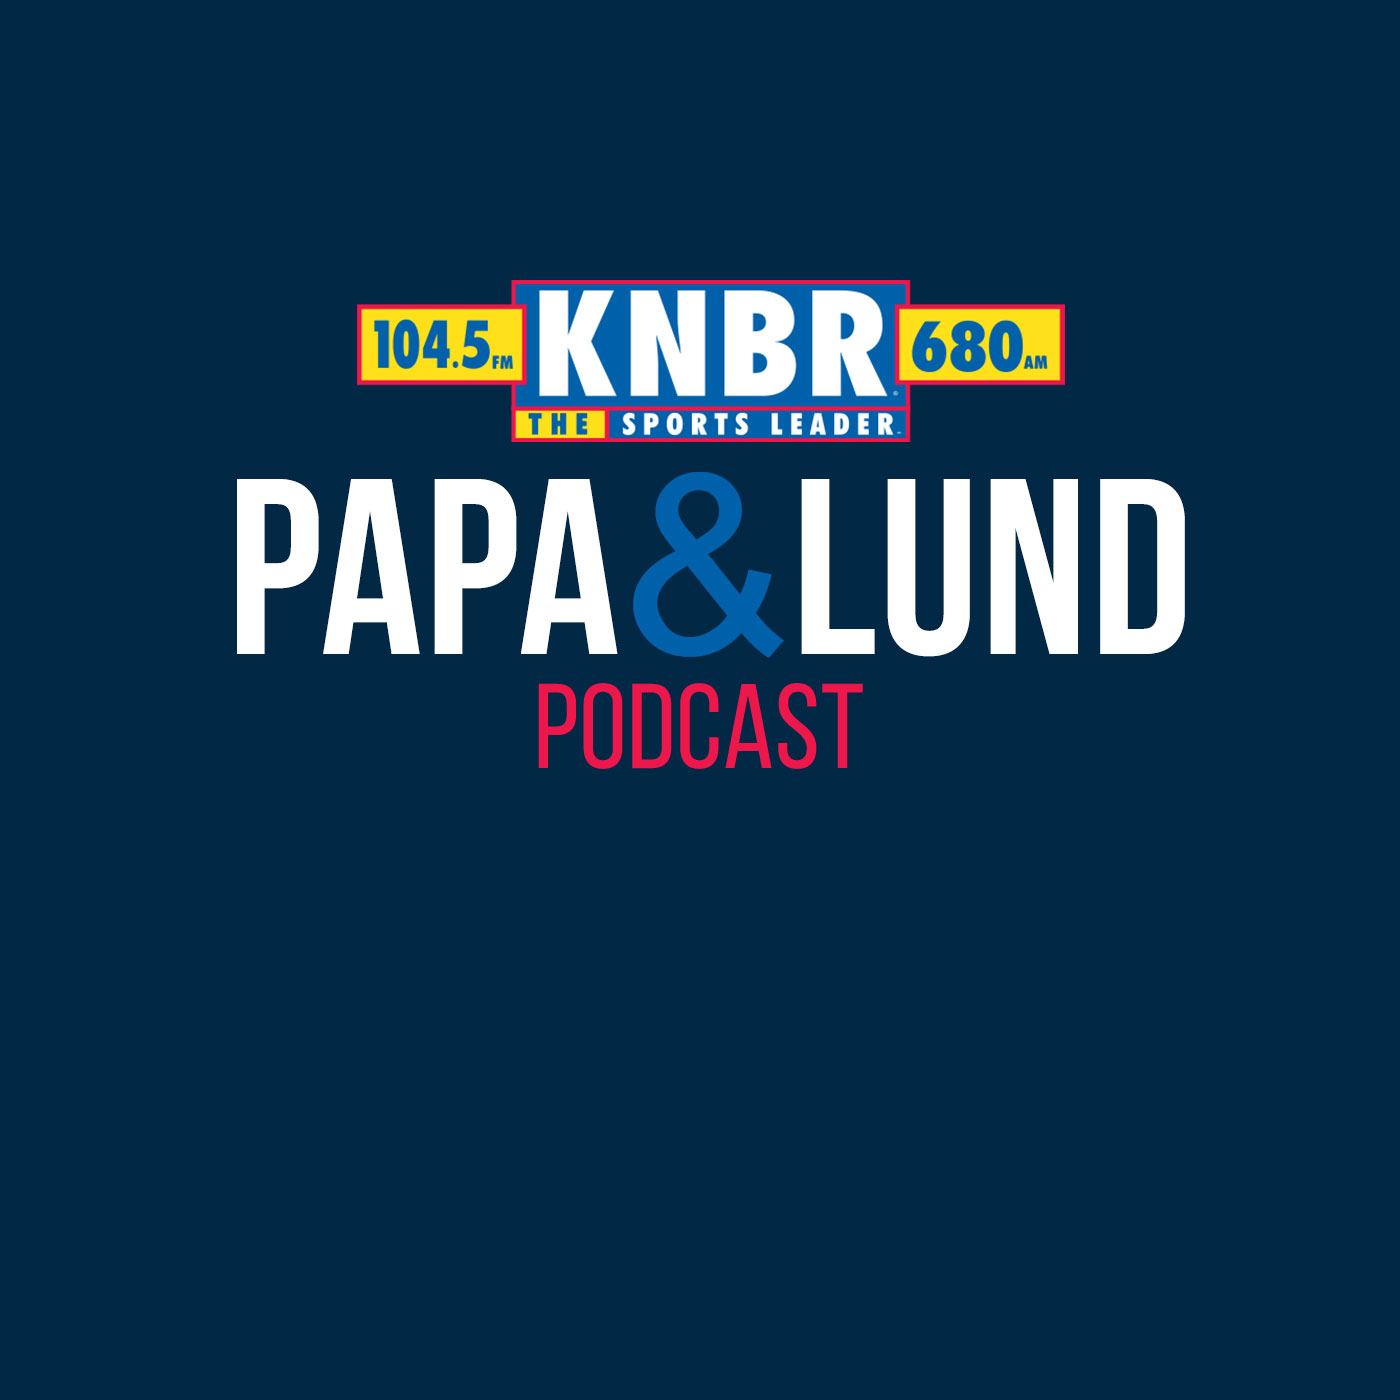 2-1 Marc Spears joins Papa & Lund to give the latest news on the NBA trade deadline and the health of Draymond Green